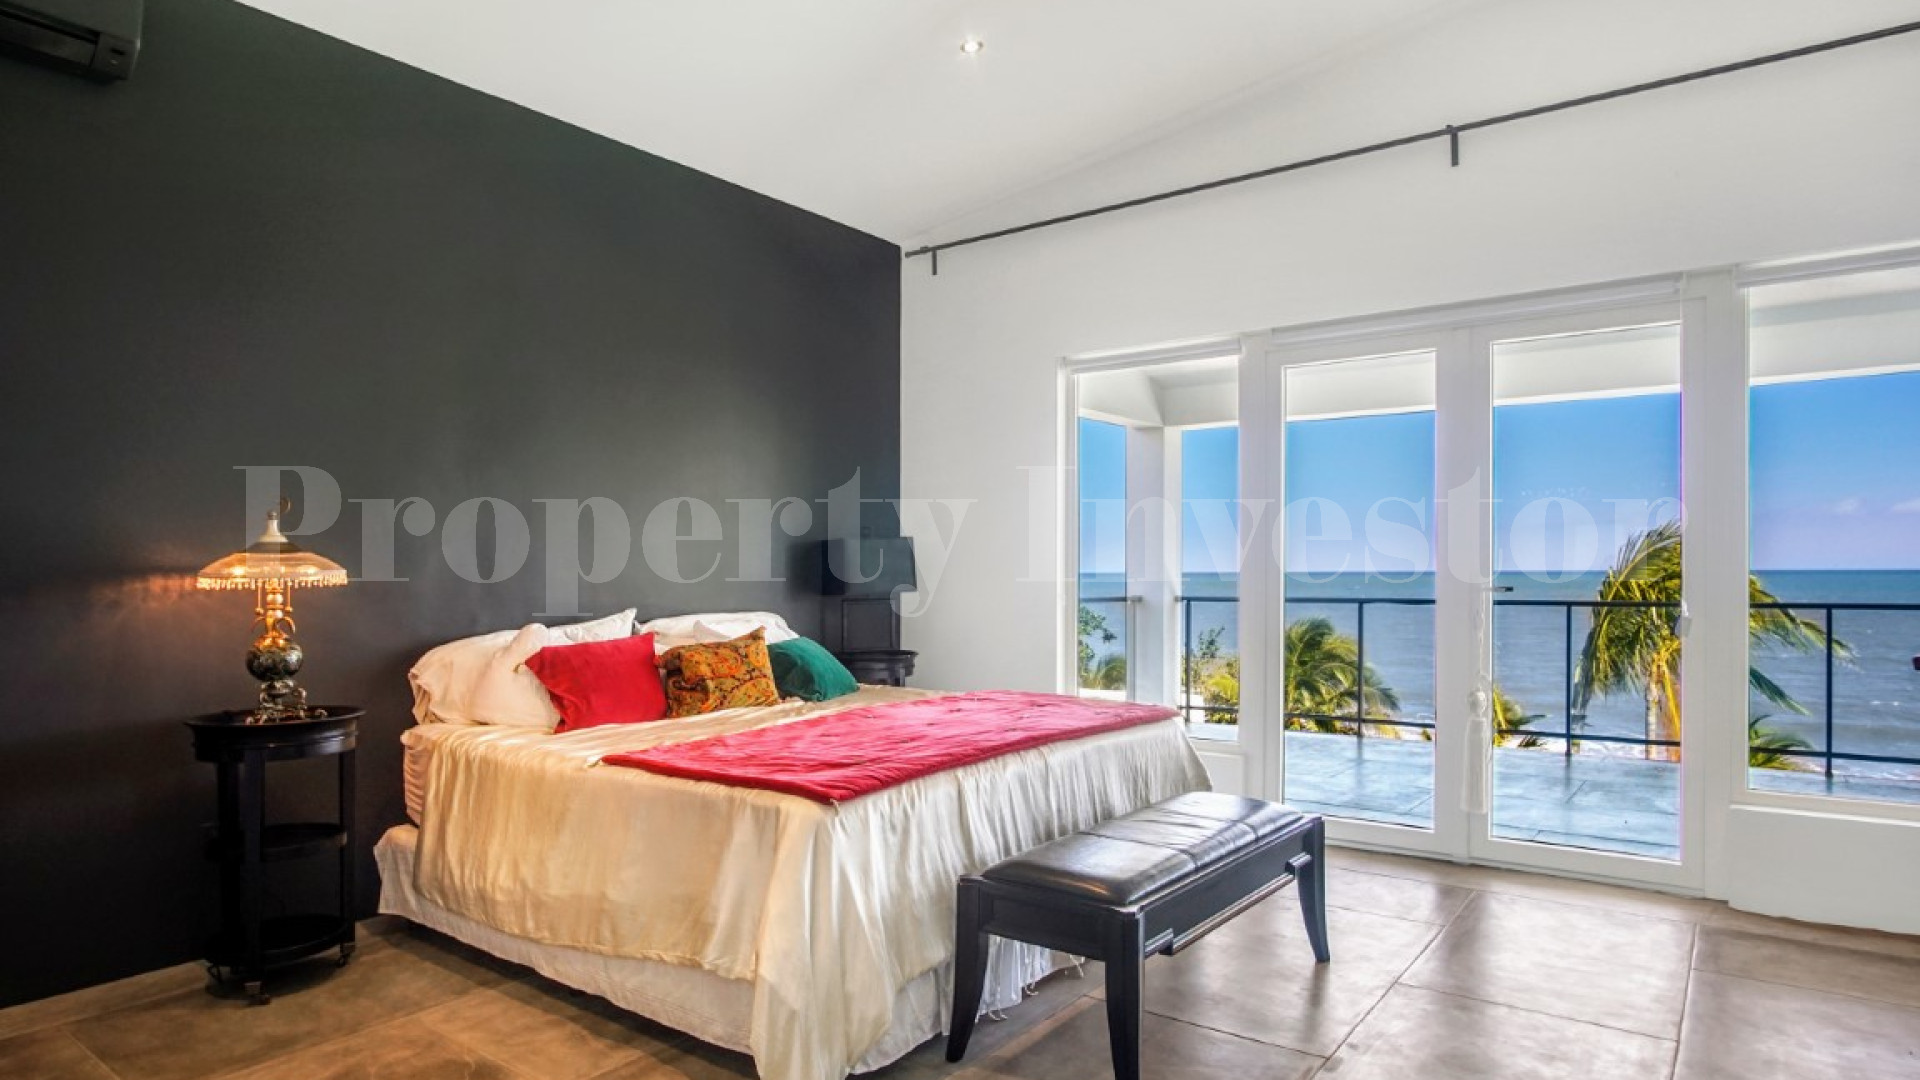 Incredible 6 Bedroom Luxury Beachfront Villa with Spectacular Panoramic Pacific Ocean Views for Sale in Pedasi, Panama